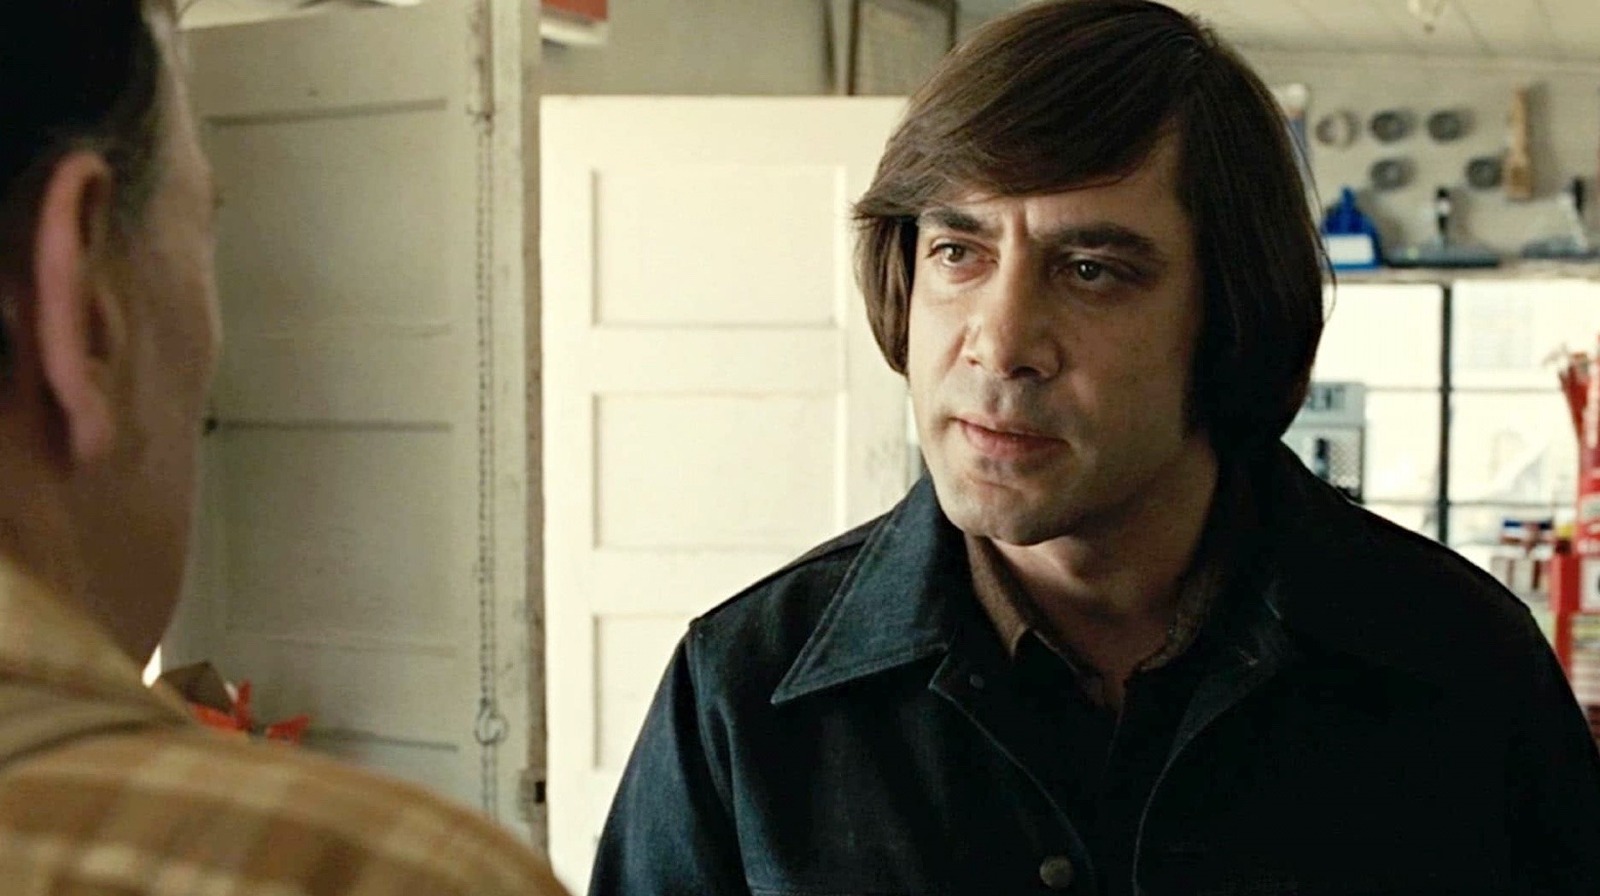 https://www.slashfilm.com/img/gallery/no-country-for-old-men-ending-explained-you-cant-stop-whats-coming/l-intro-1638207978.jpg